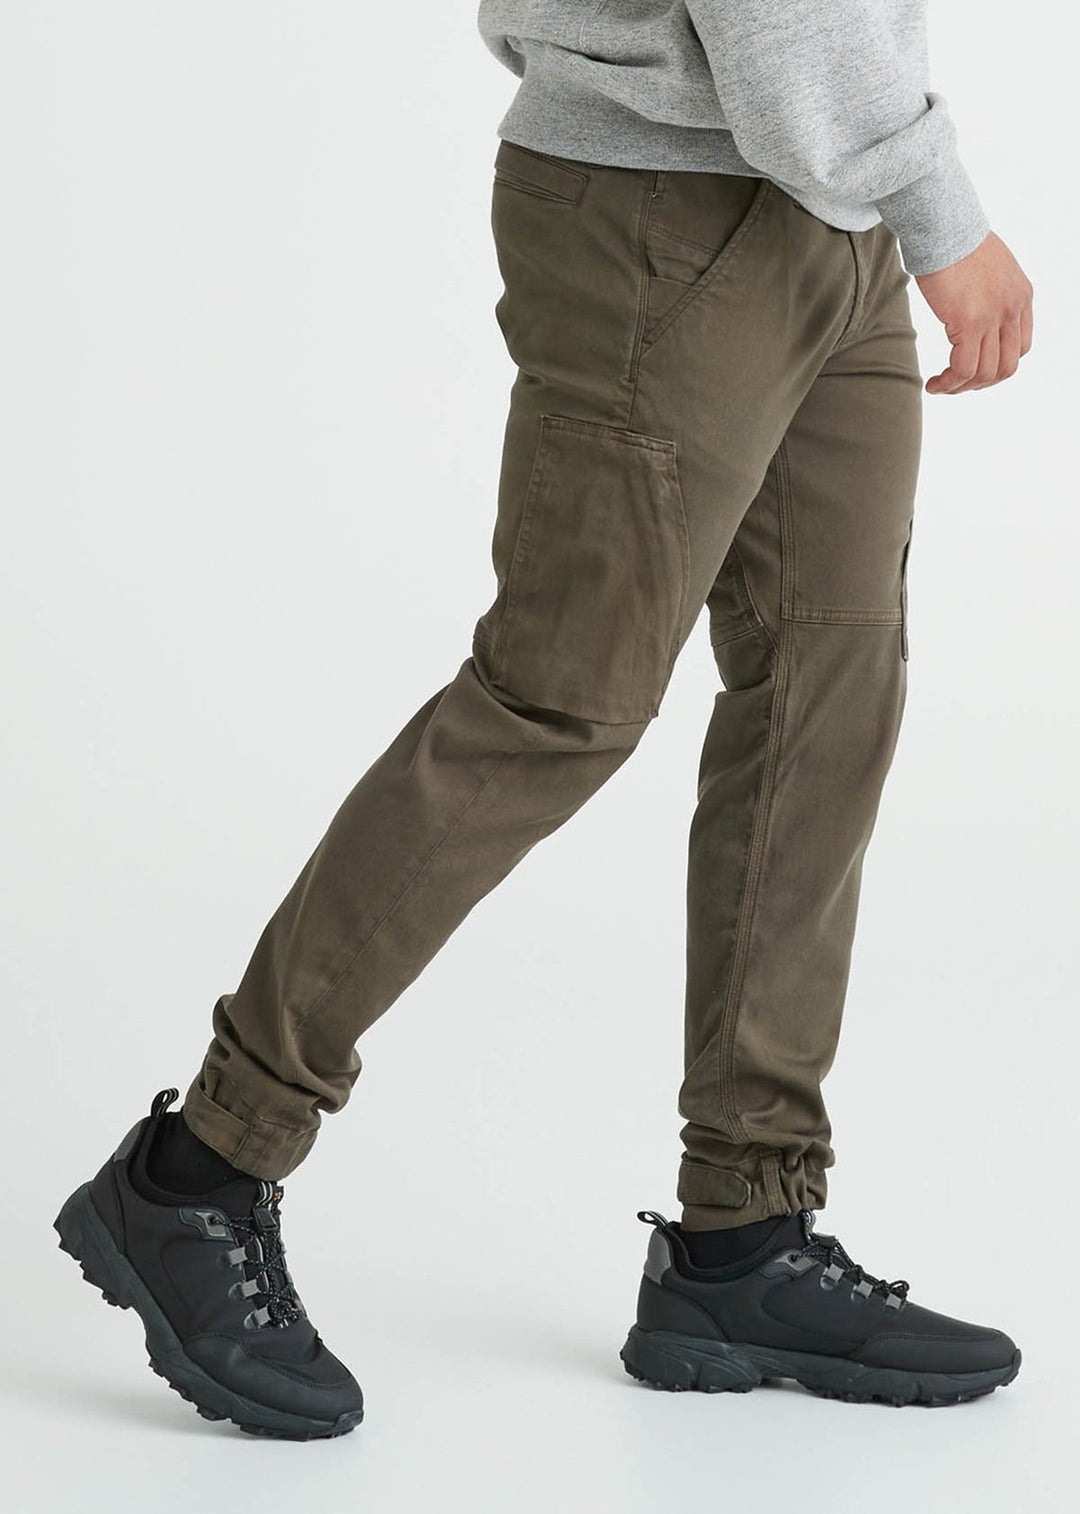 MPTH1006 Live Free Adventure Pant - The Leather House